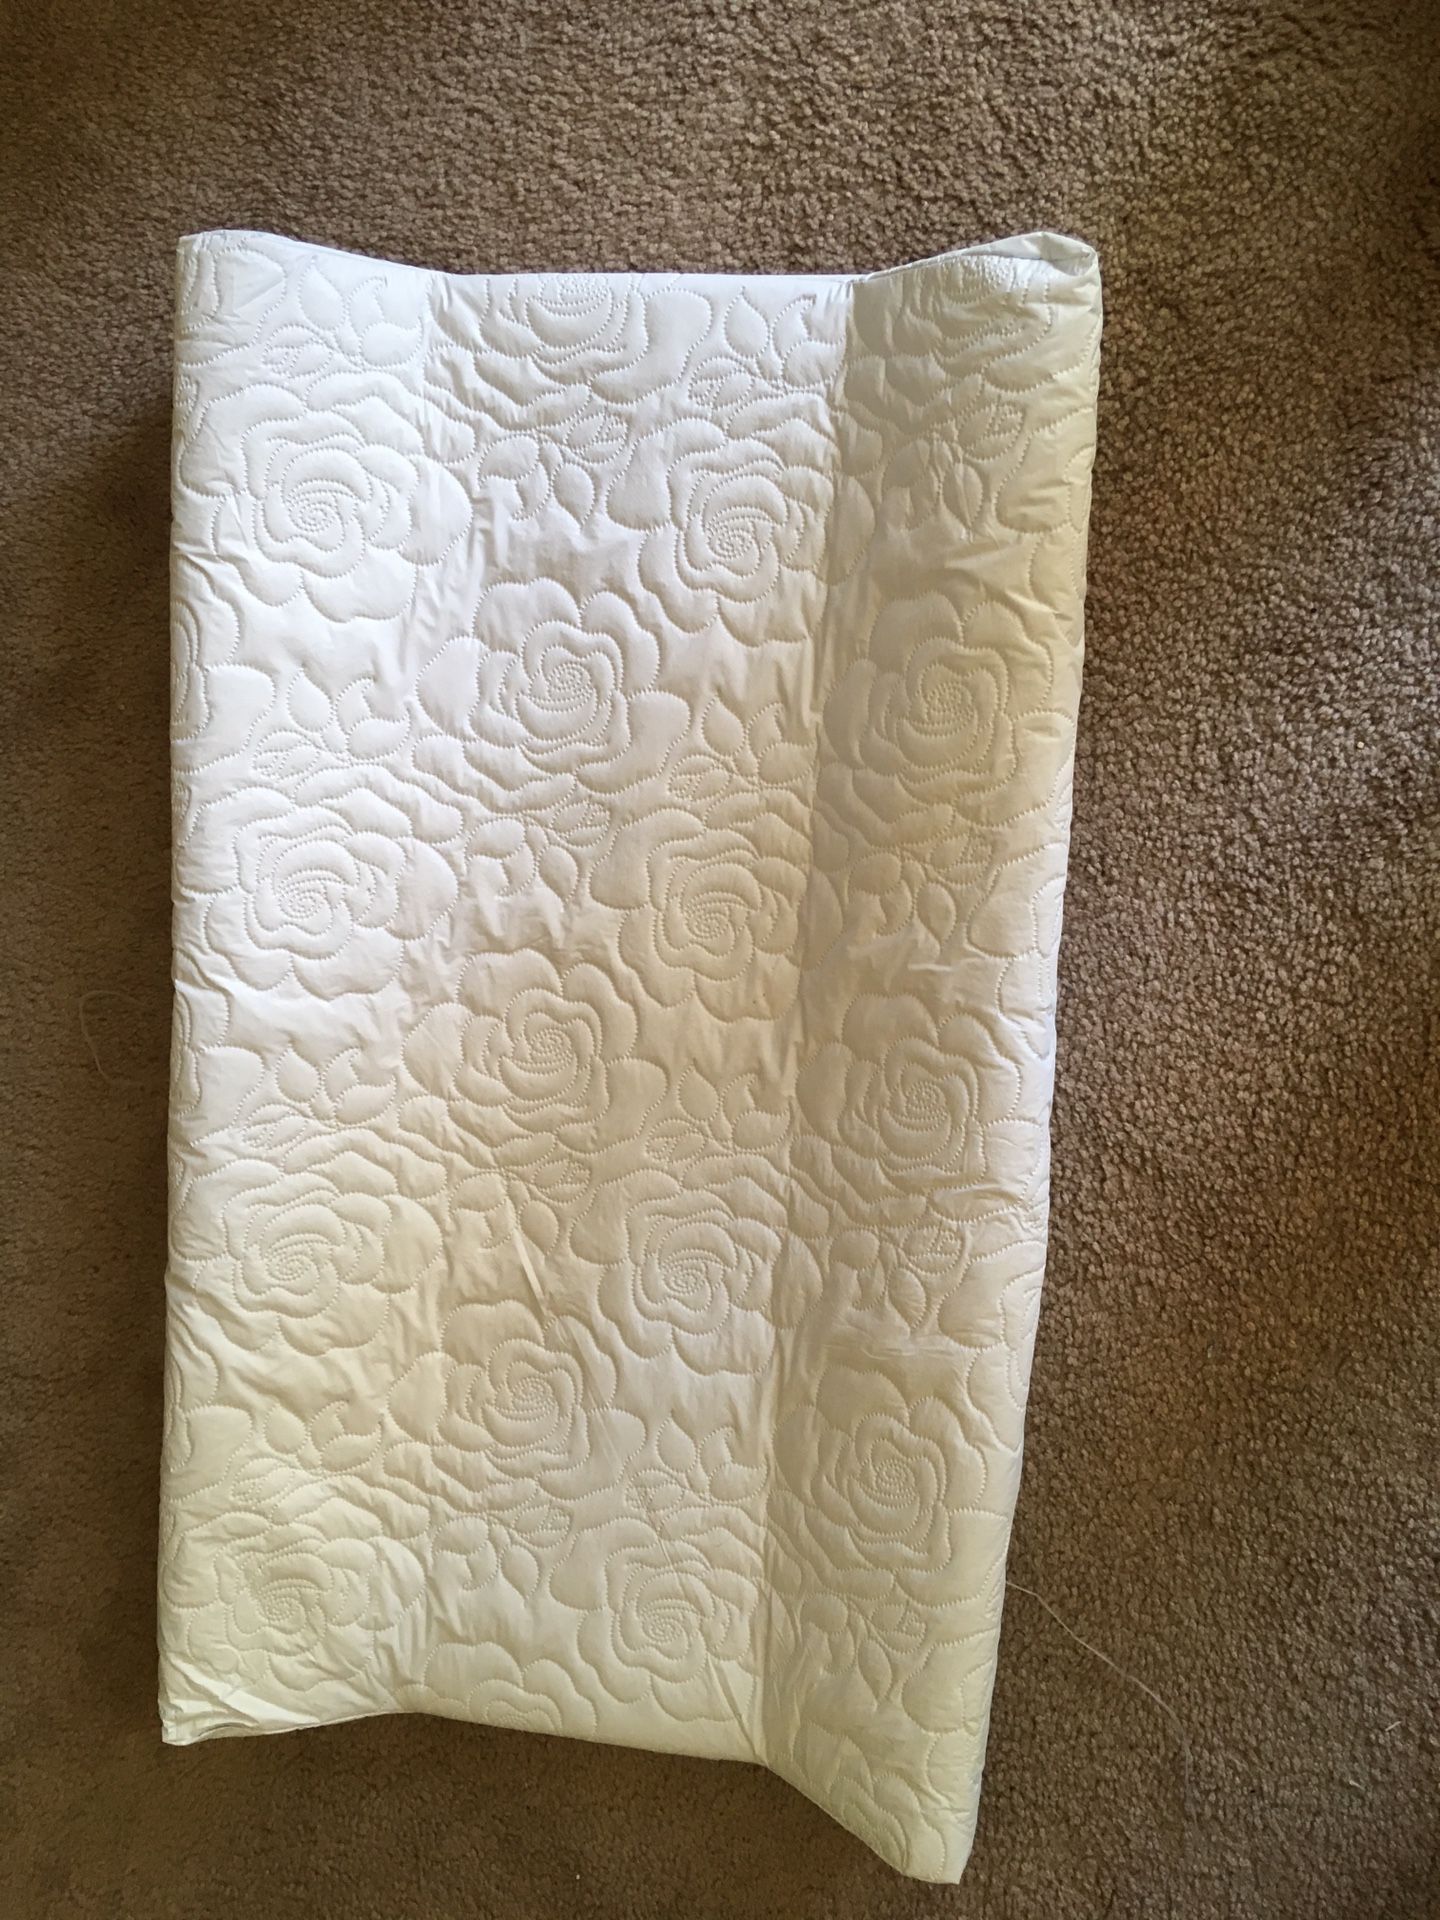 Changing table pad